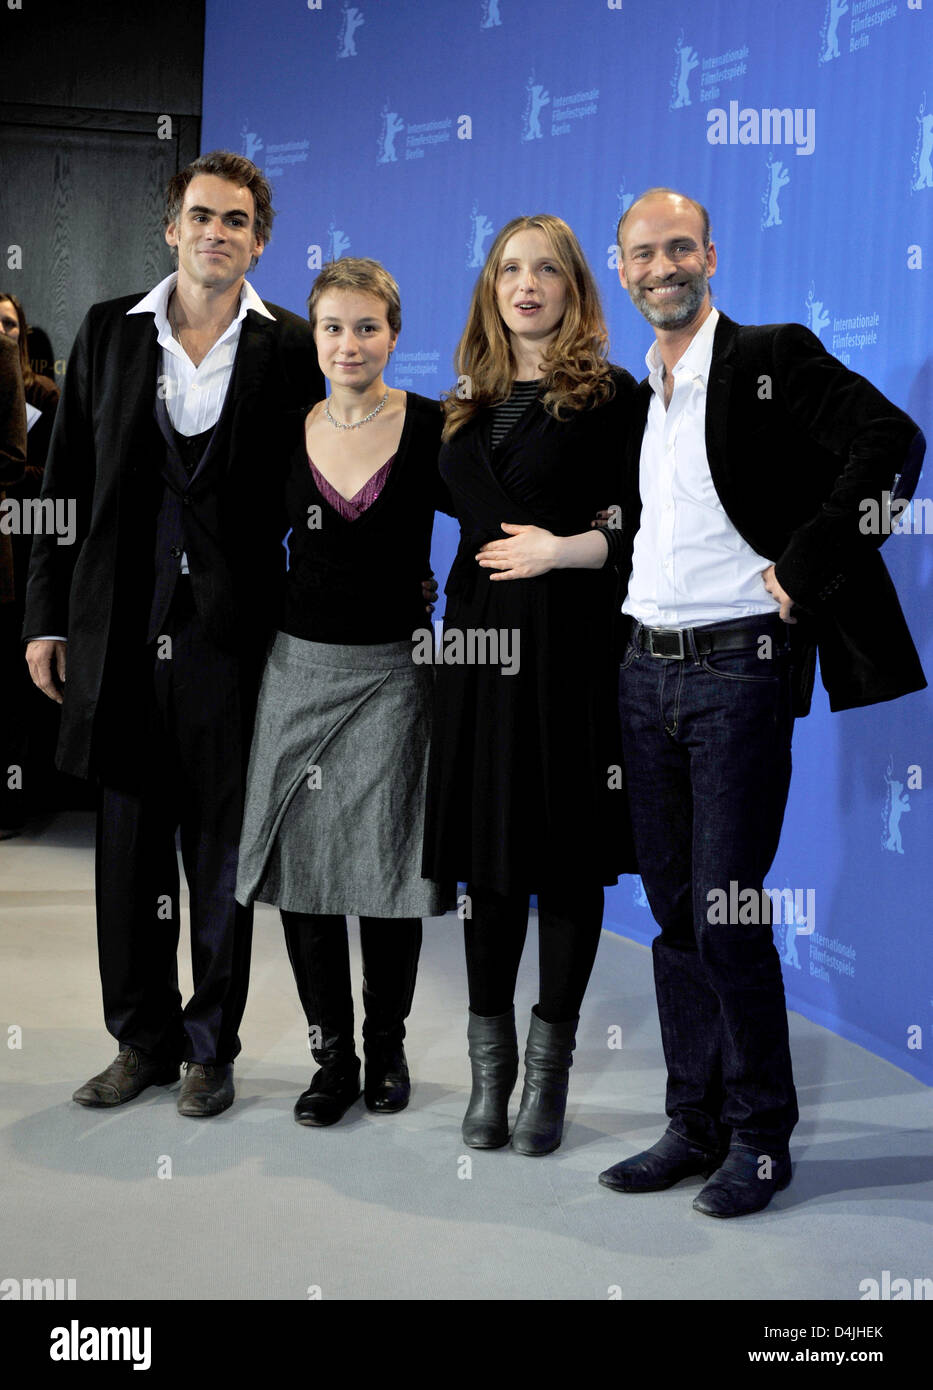 Actor Sebastian Blomberg (L-R), Anamaria Marinca, Julie Delpy and producer Andro Steinborn pose during a photo call for their film ?The Countess? at the 59th Berlin International Film Festival in Berlin, Germany, 09 February 2009. The film runs in the ?Panorama Special? competition. A total of 18 films compete for the Silver and Golden Bears at the 59th Berlinale. Photo: Gero Brelo Stock Photo